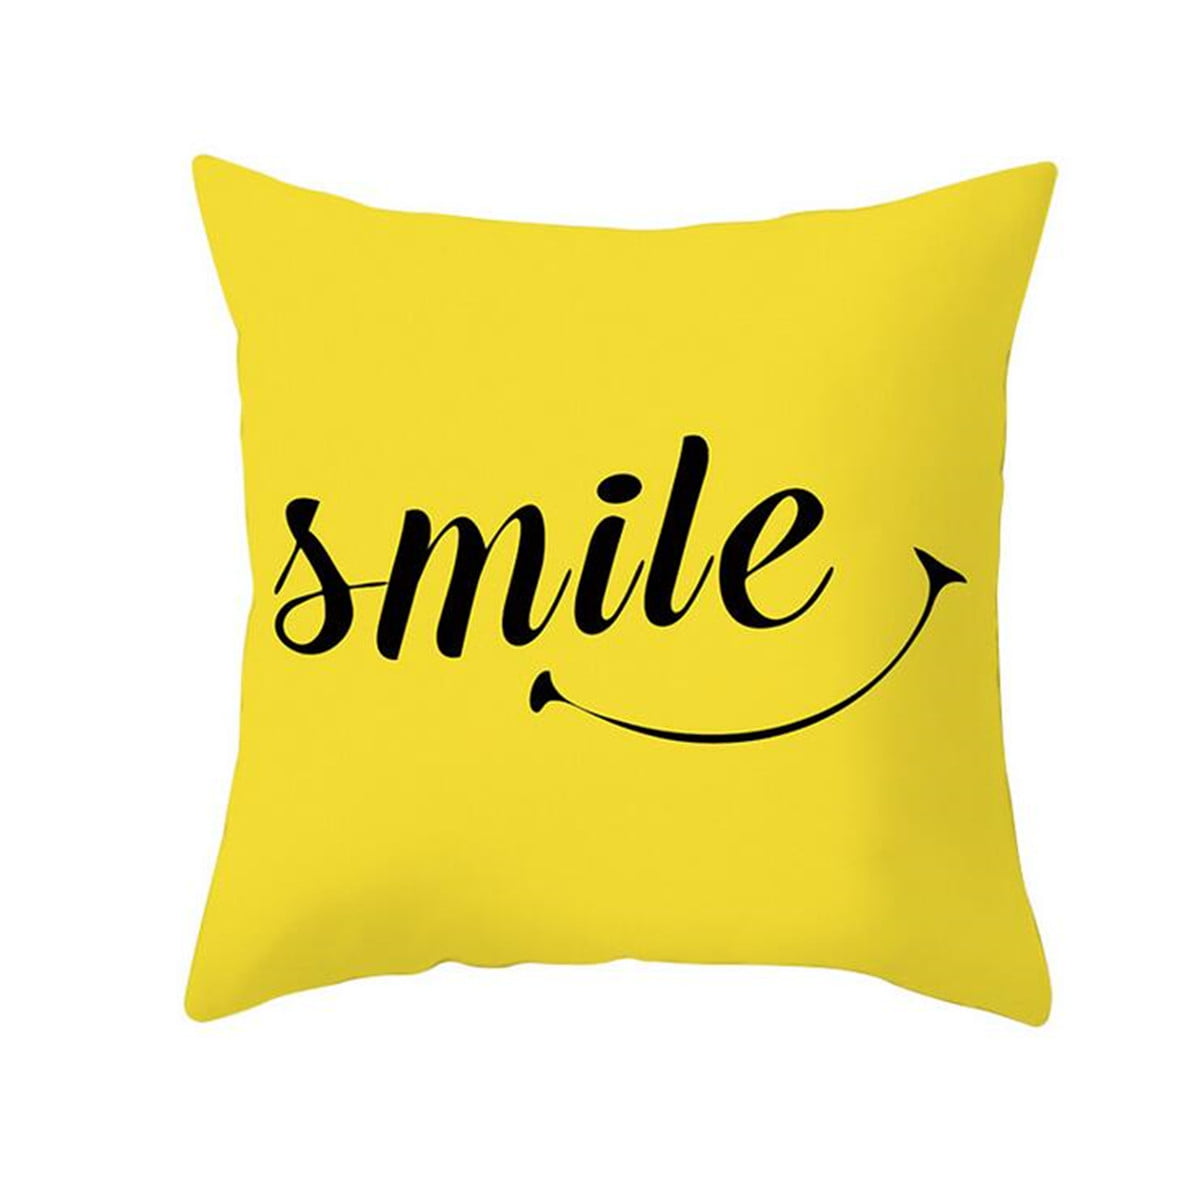 Throw Cushion Case 14x14" Smells Like Sunshine Yellow Pillow Cover